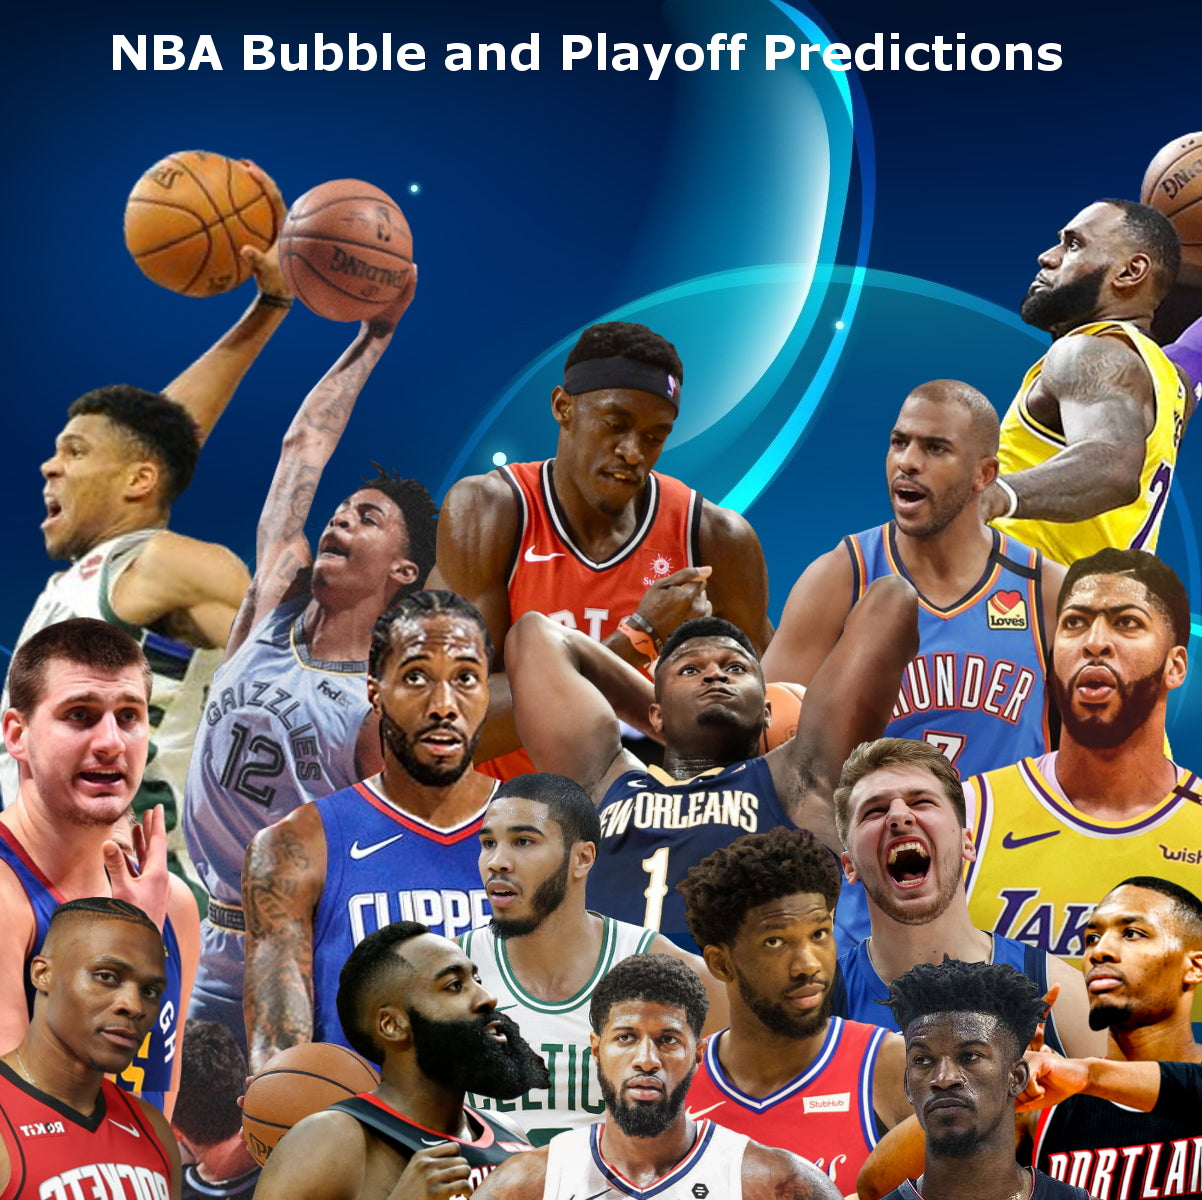 2020 NBA Bubble & Playoff Preview